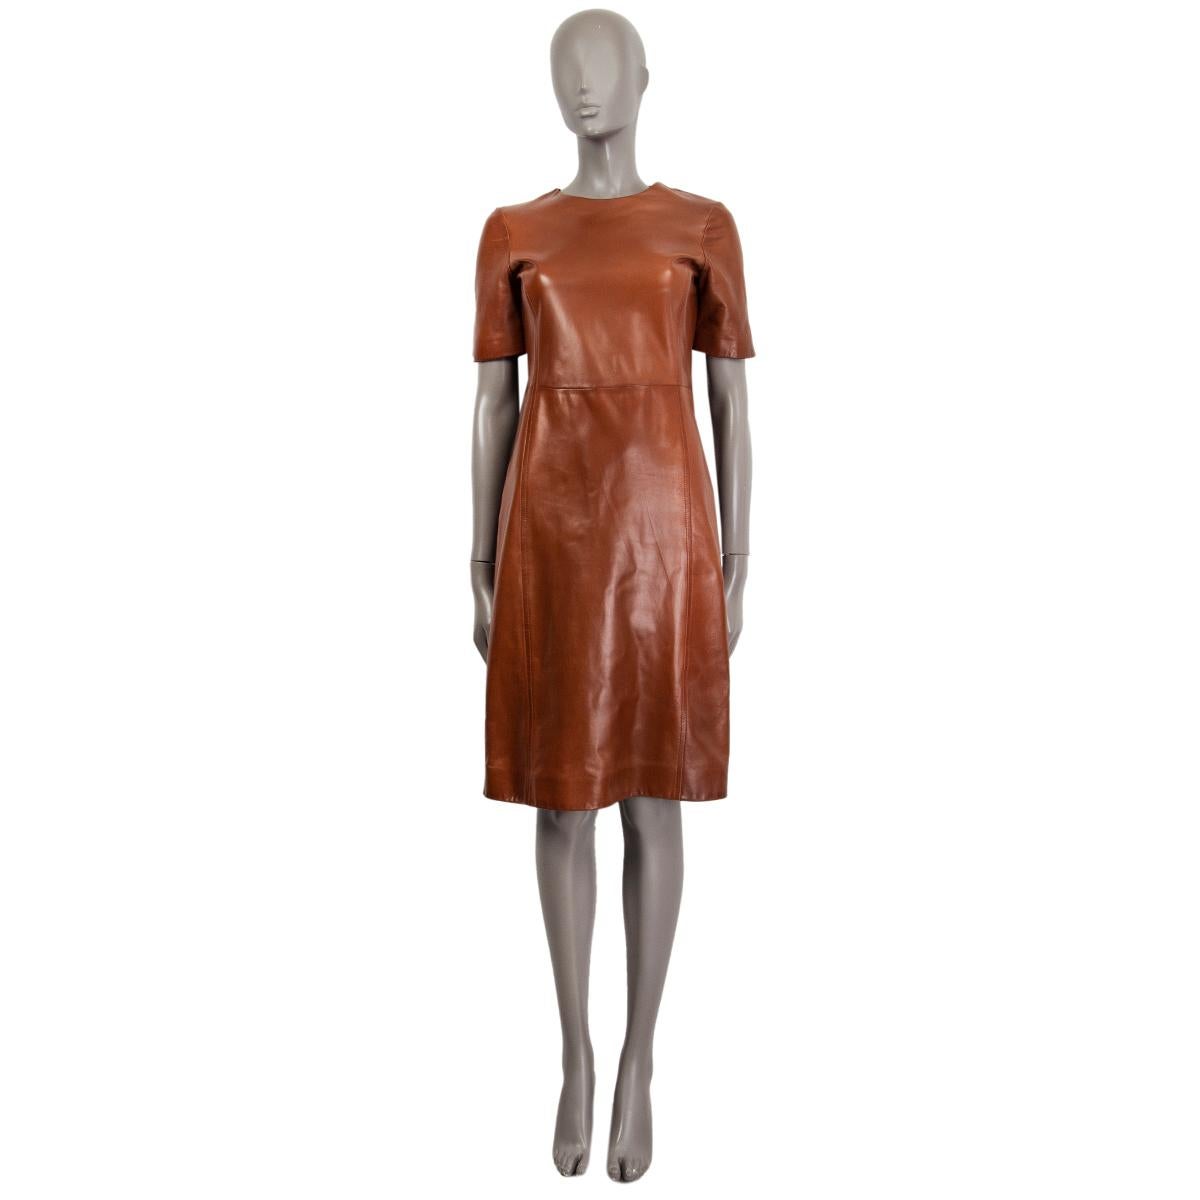 100% authentic Prada short-sleeve. shift dress in cognac brown lambskin. Lined in cupro (93%) and elastane (7%). Opens with a zipper on the back. Has been worn once and is in excellent condition. 

Measurements
Tag Size	42
Size	M
Shoulder Width	38cm